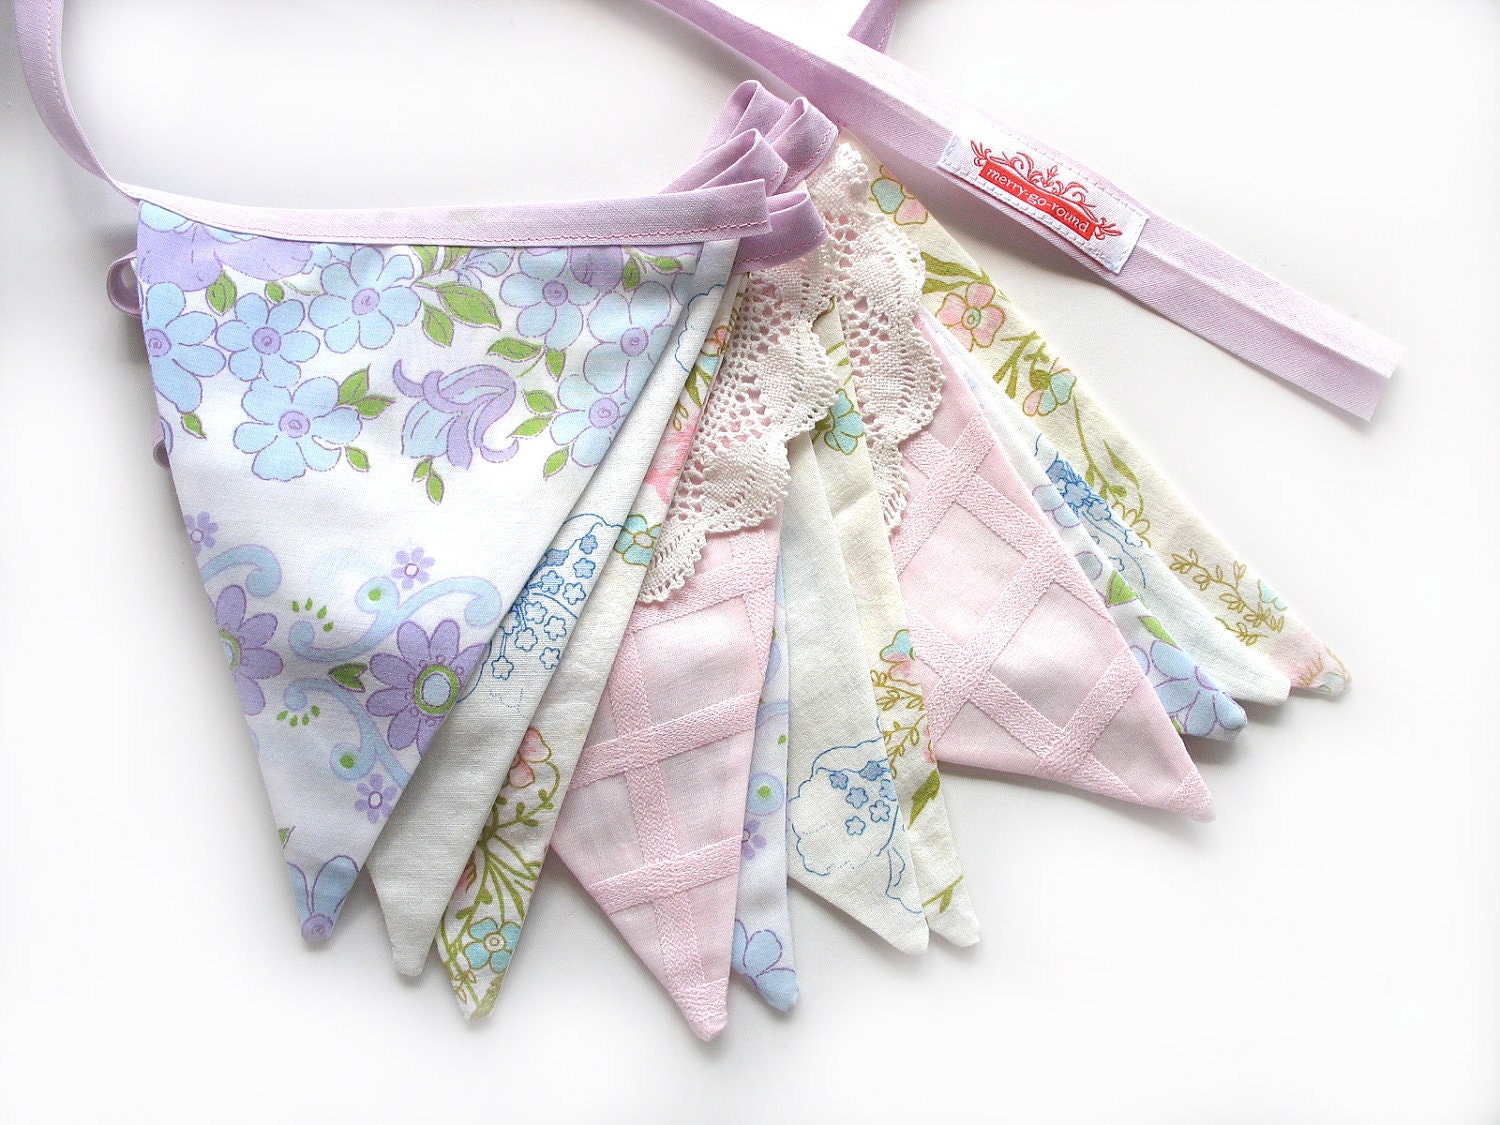 Vintage Pretty Pastel Floral Pink & Lilac Doily Lace, Floral Flag Bunting. Wall hanging, Parties, Party, Wedding etc